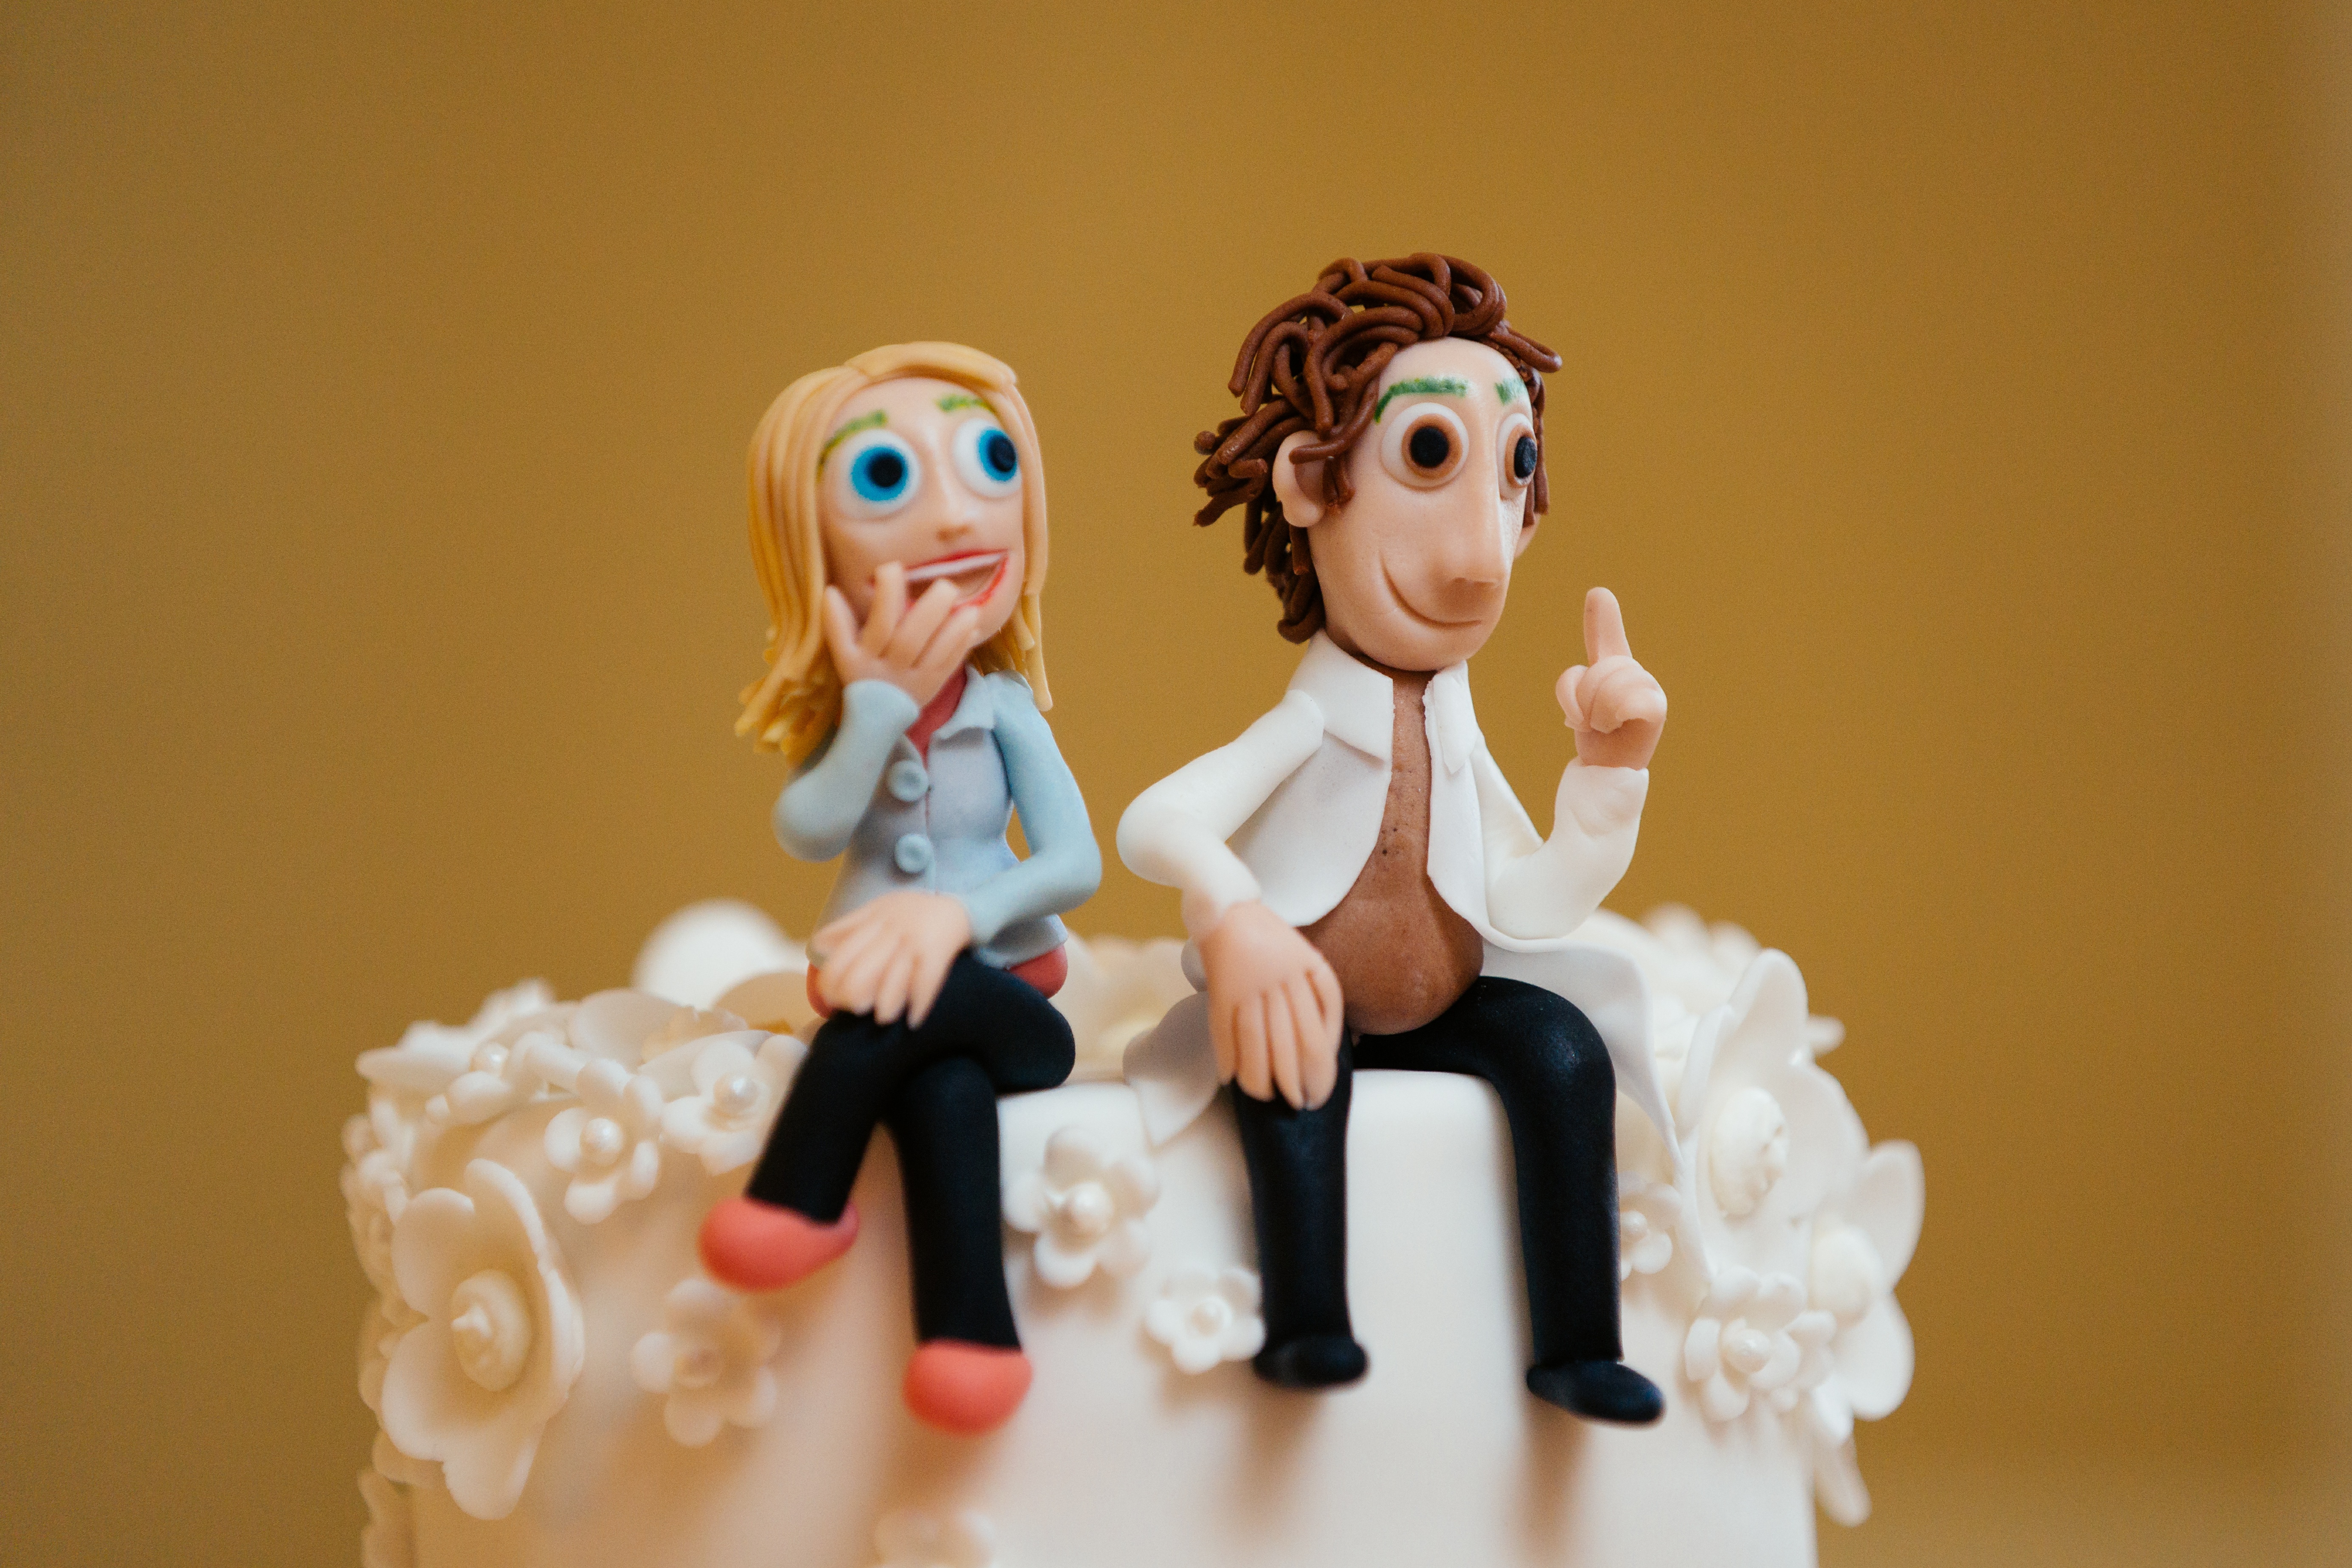 Cloudy With A Chance Of Meatballs Flint Lockwood Sam Sparks Wedding Cake Topper